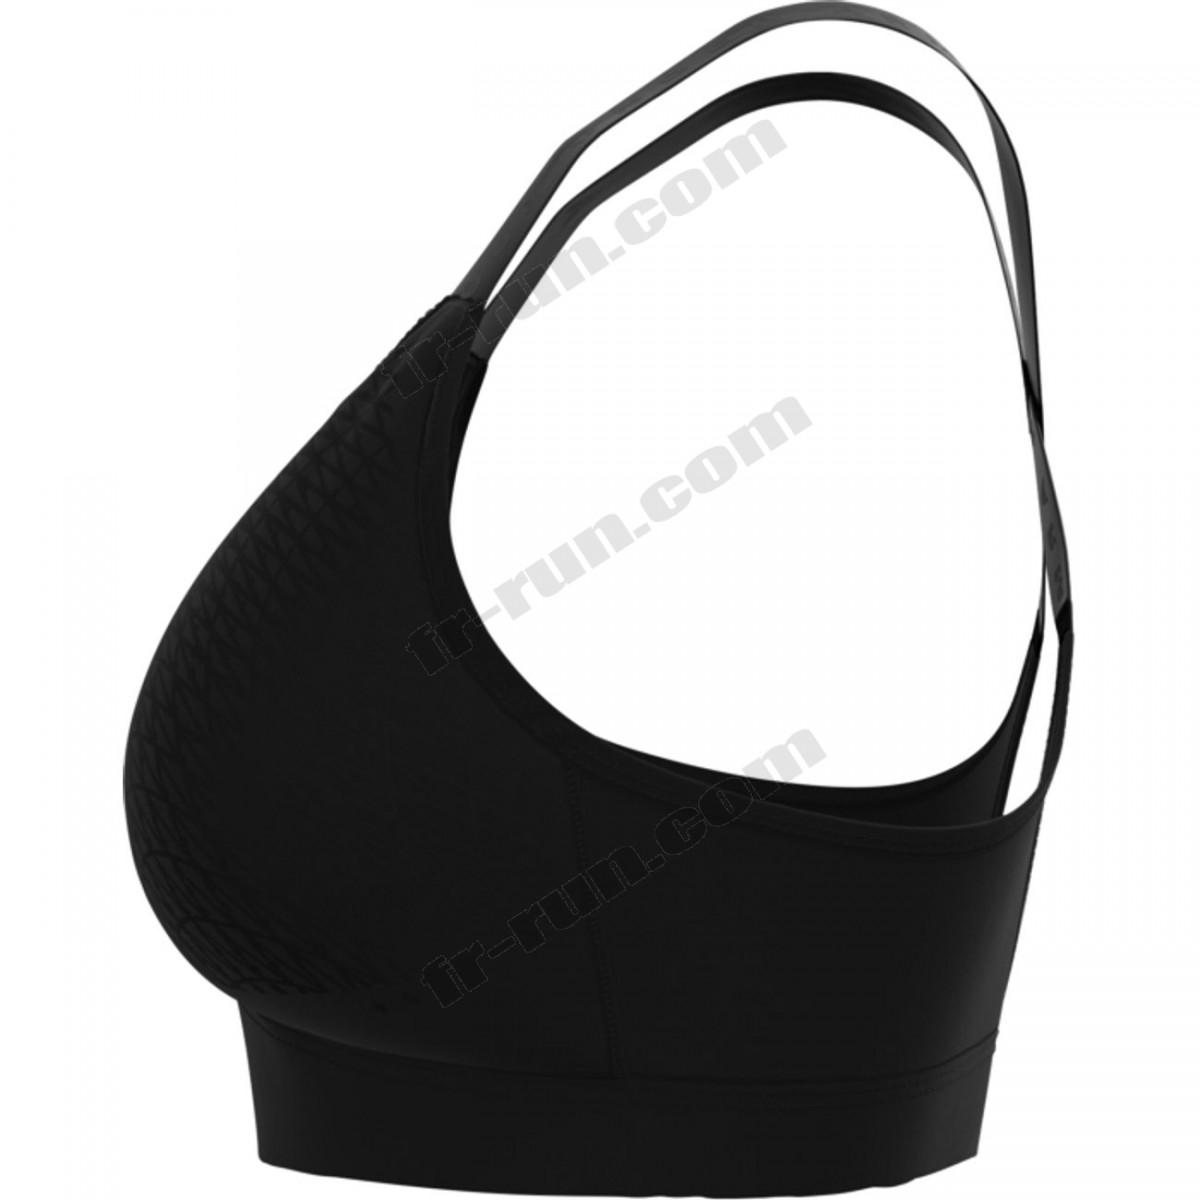 Under Armour/BRASSIERE Multisport femme UNDER ARMOUR INFINITY COVERED MID ◇◇◇ Pas Cher Du Tout - Under Armour/BRASSIERE Multisport femme UNDER ARMOUR INFINITY COVERED MID ◇◇◇ Pas Cher Du Tout